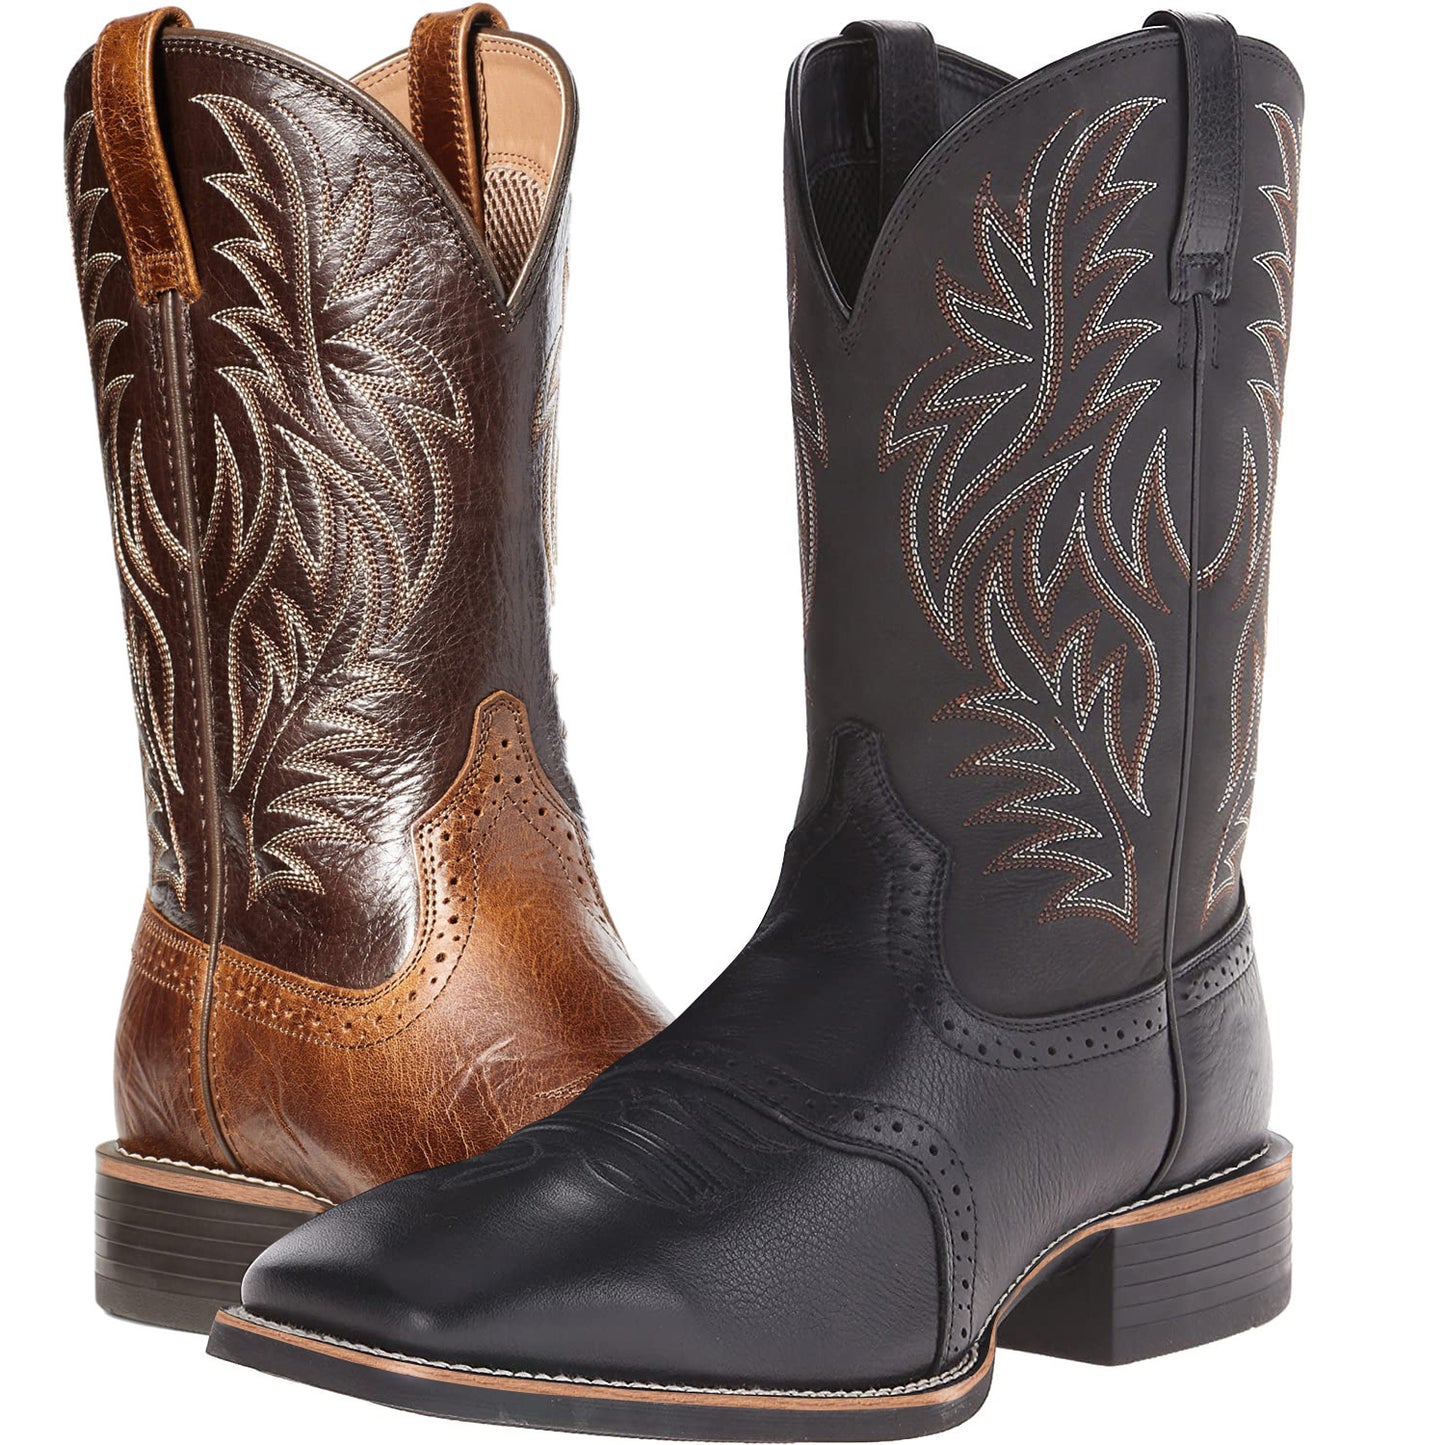 High Embroidery Vintage Carved Stitching Wide Head Western Cowboy Boot Plus Size Shoes & Bags